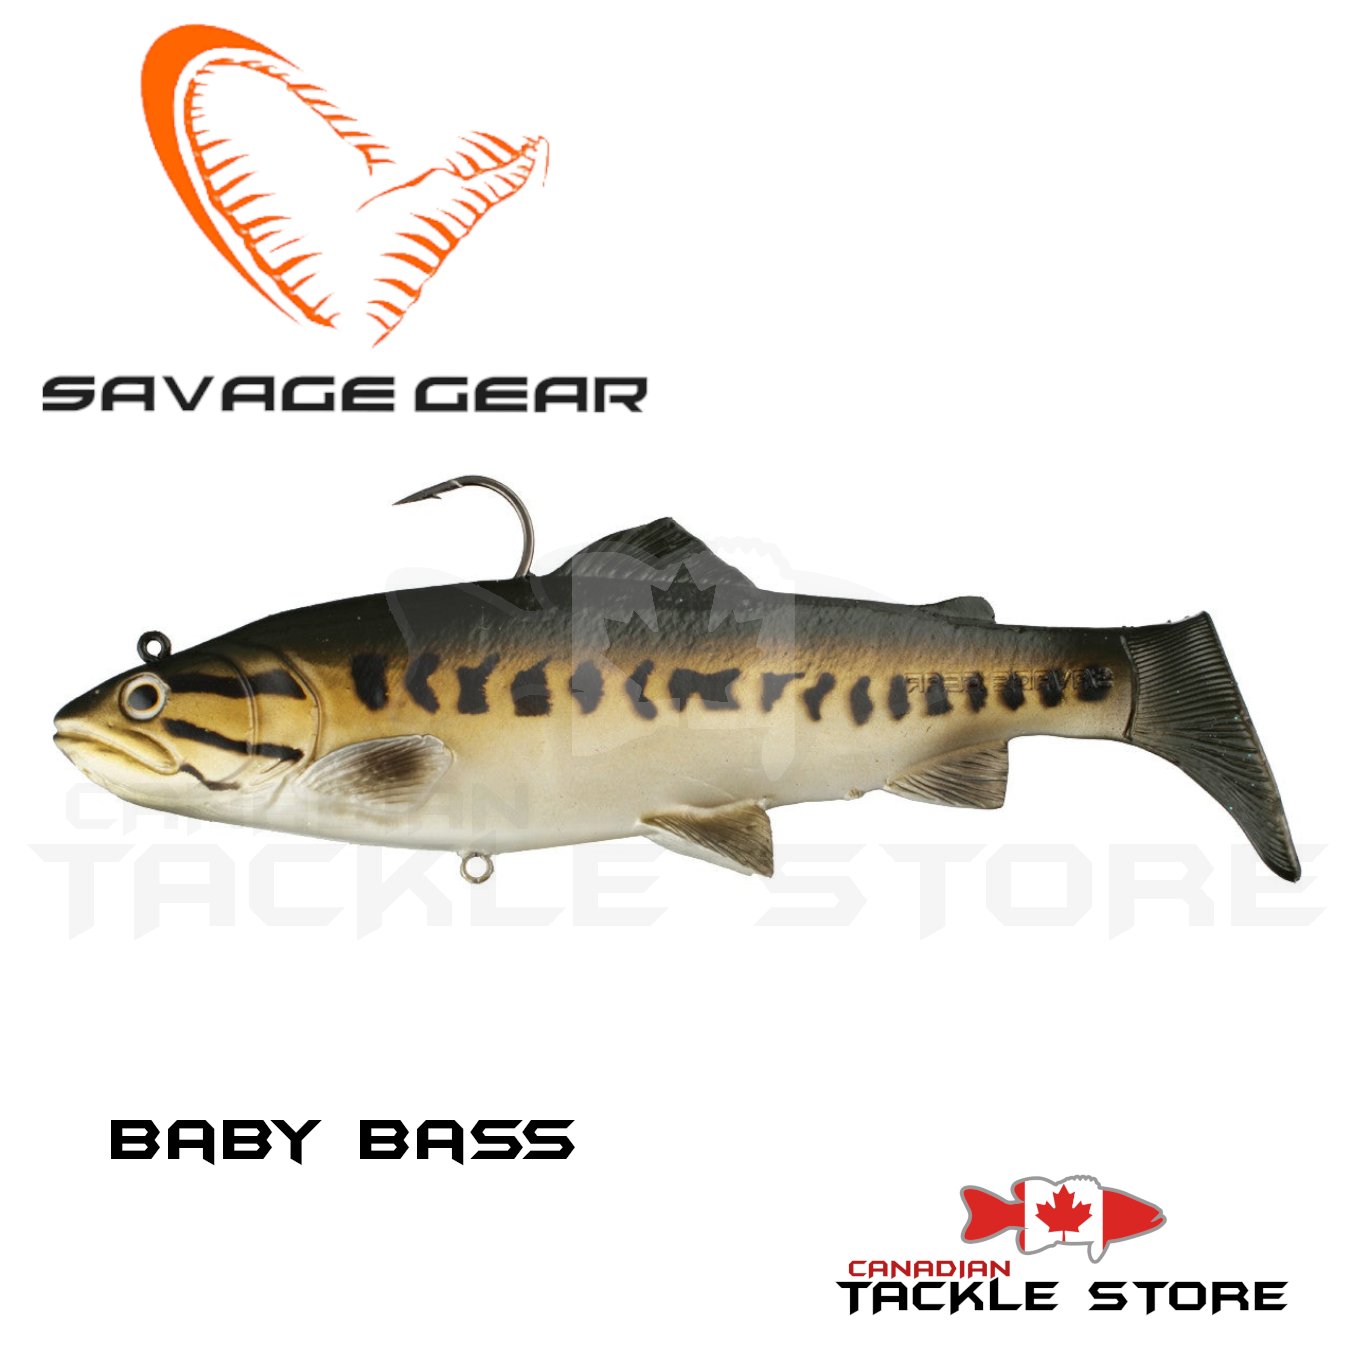 Savage Gear – Canadian Tackle Store